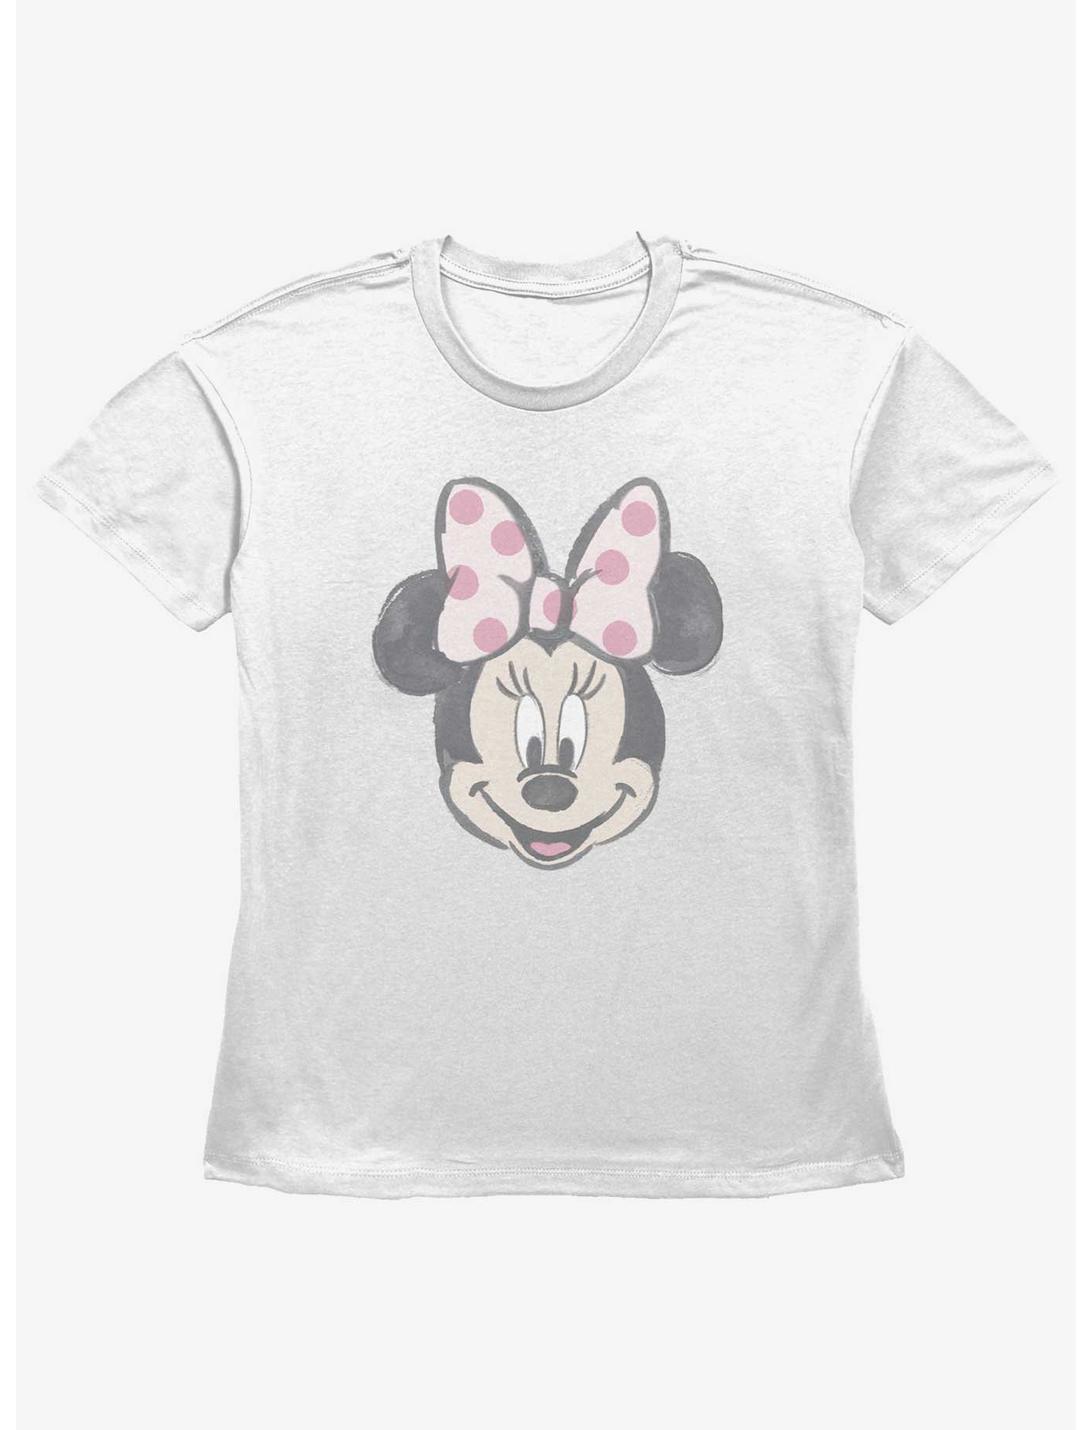 Disney Minnie Mouse Watercolor Minnie Womens Straight Fit T-Shirt, WHITE, hi-res